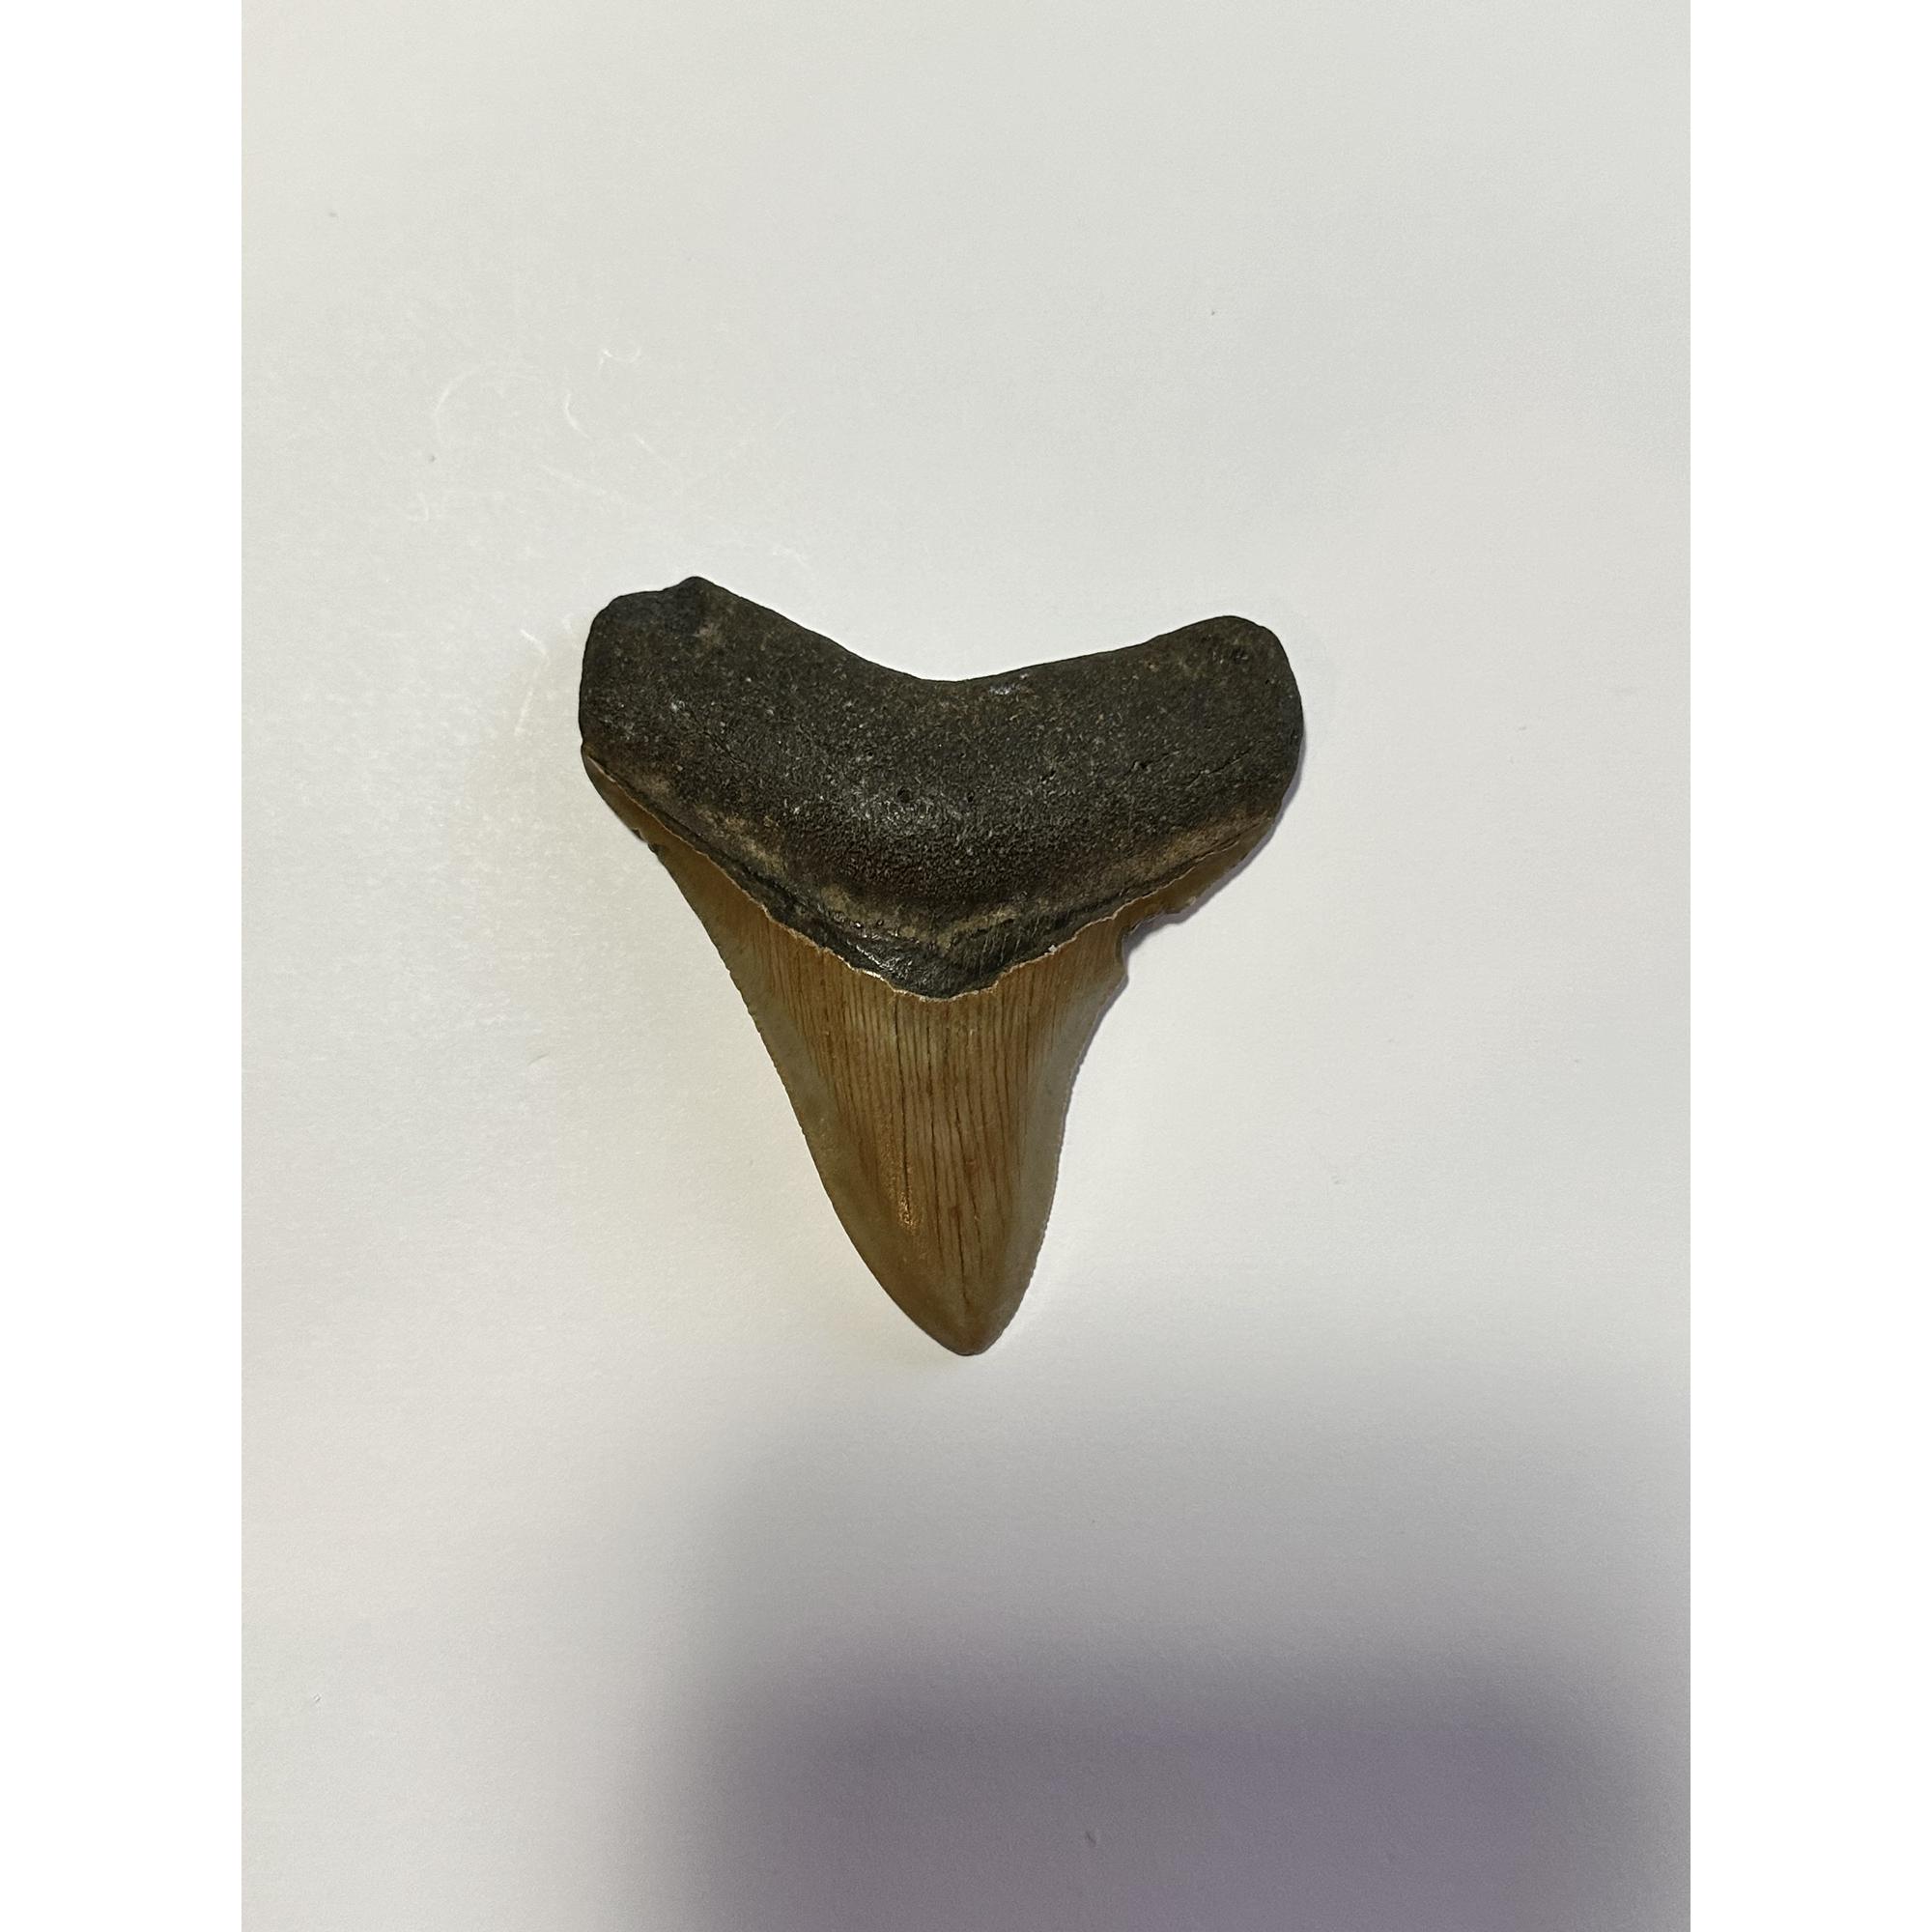 Megalodon tooth with a golden color from South Carolina. The tooth has fantastic serrations and measures 3.10 inches in length.